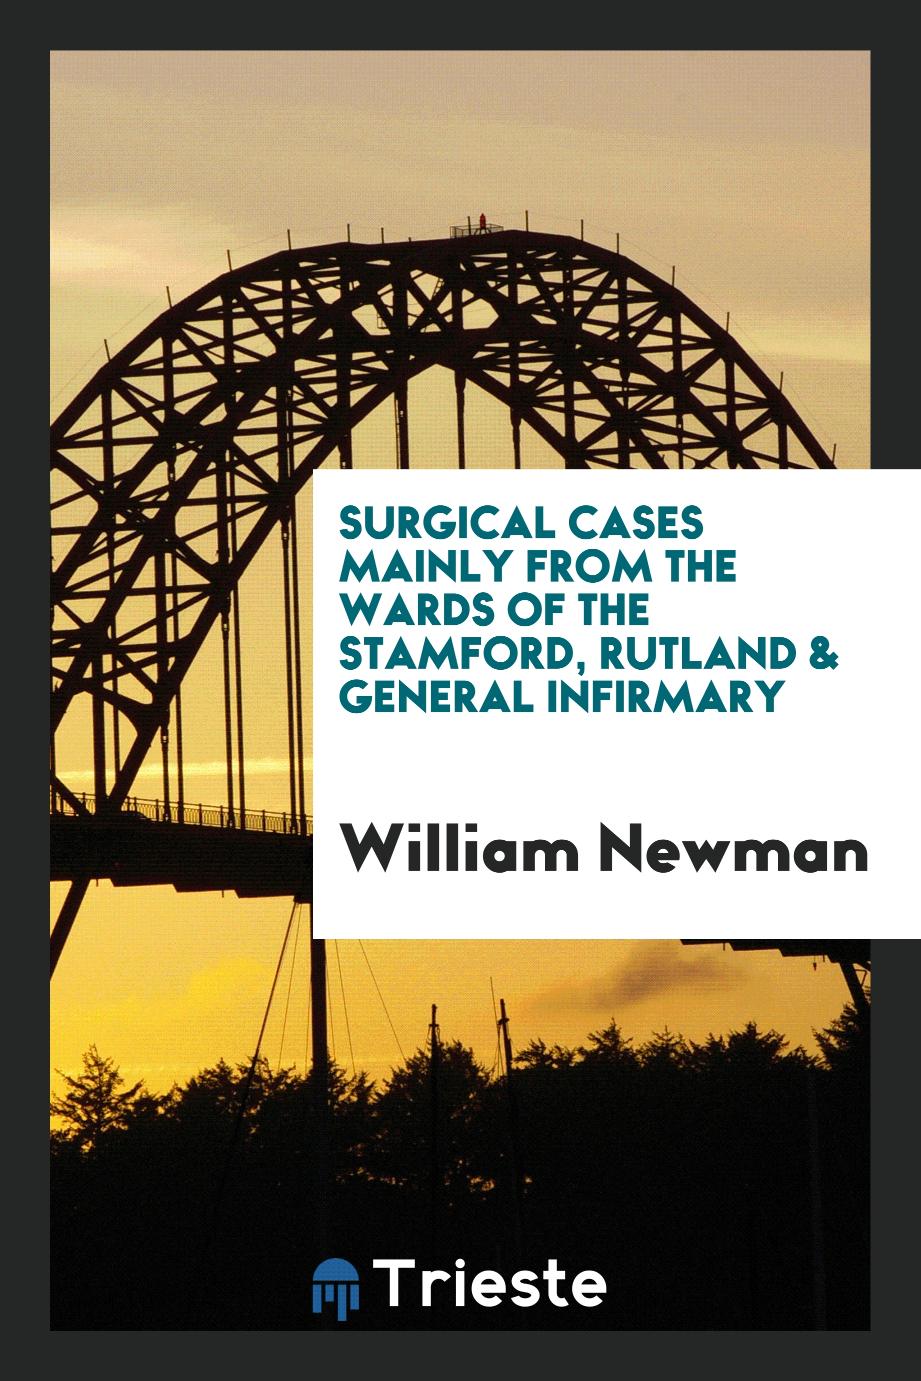 Surgical Cases Mainly from the Wards of the Stamford, Rutland & General Infirmary